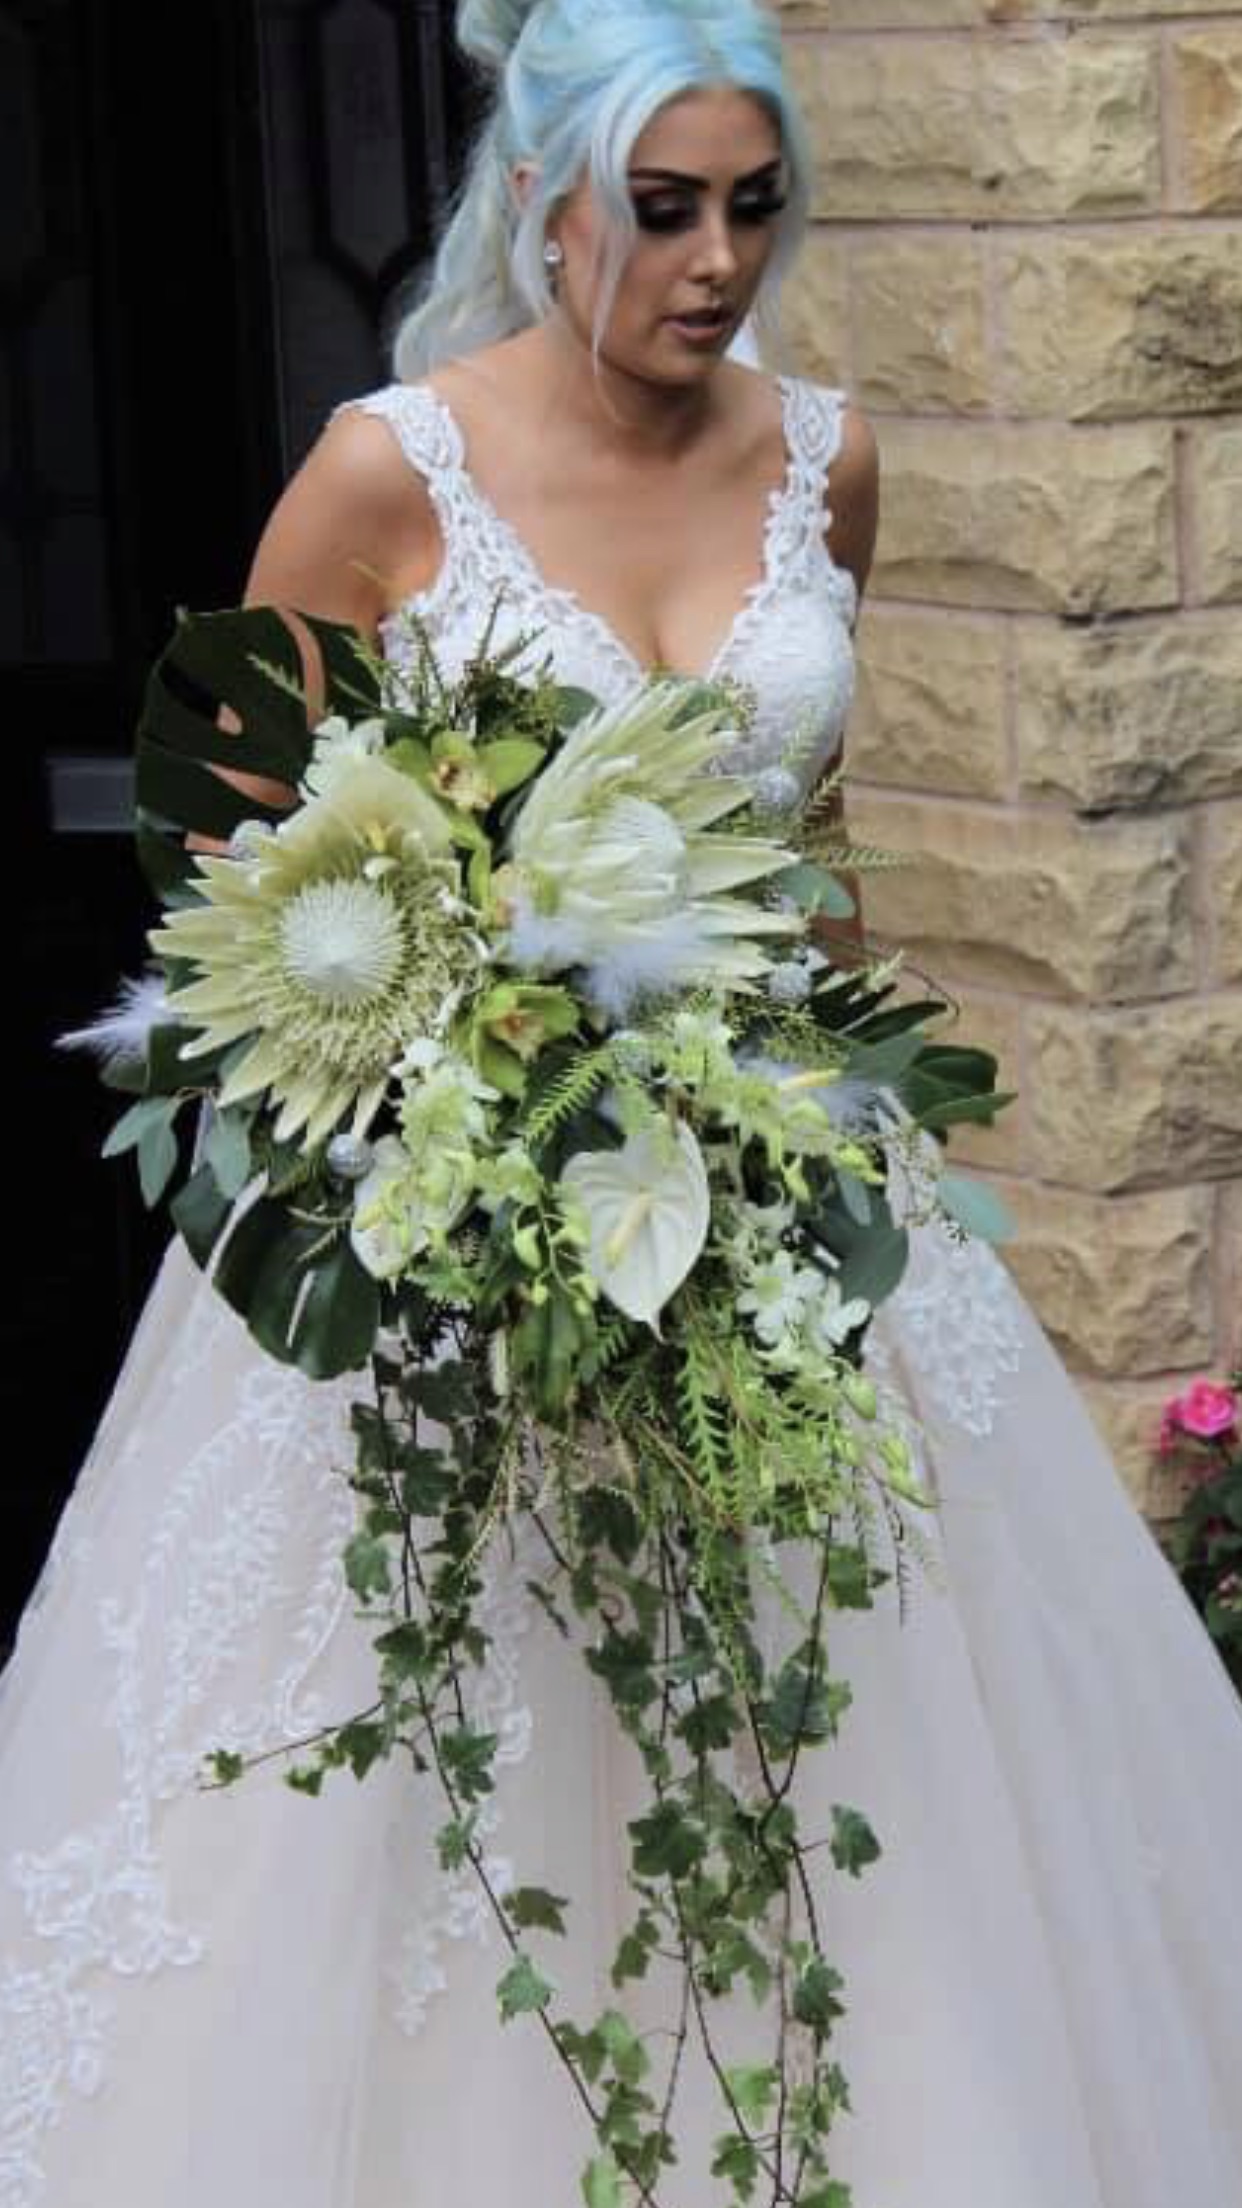 A bride holding her bouquet of flowers in front of a stone wall.